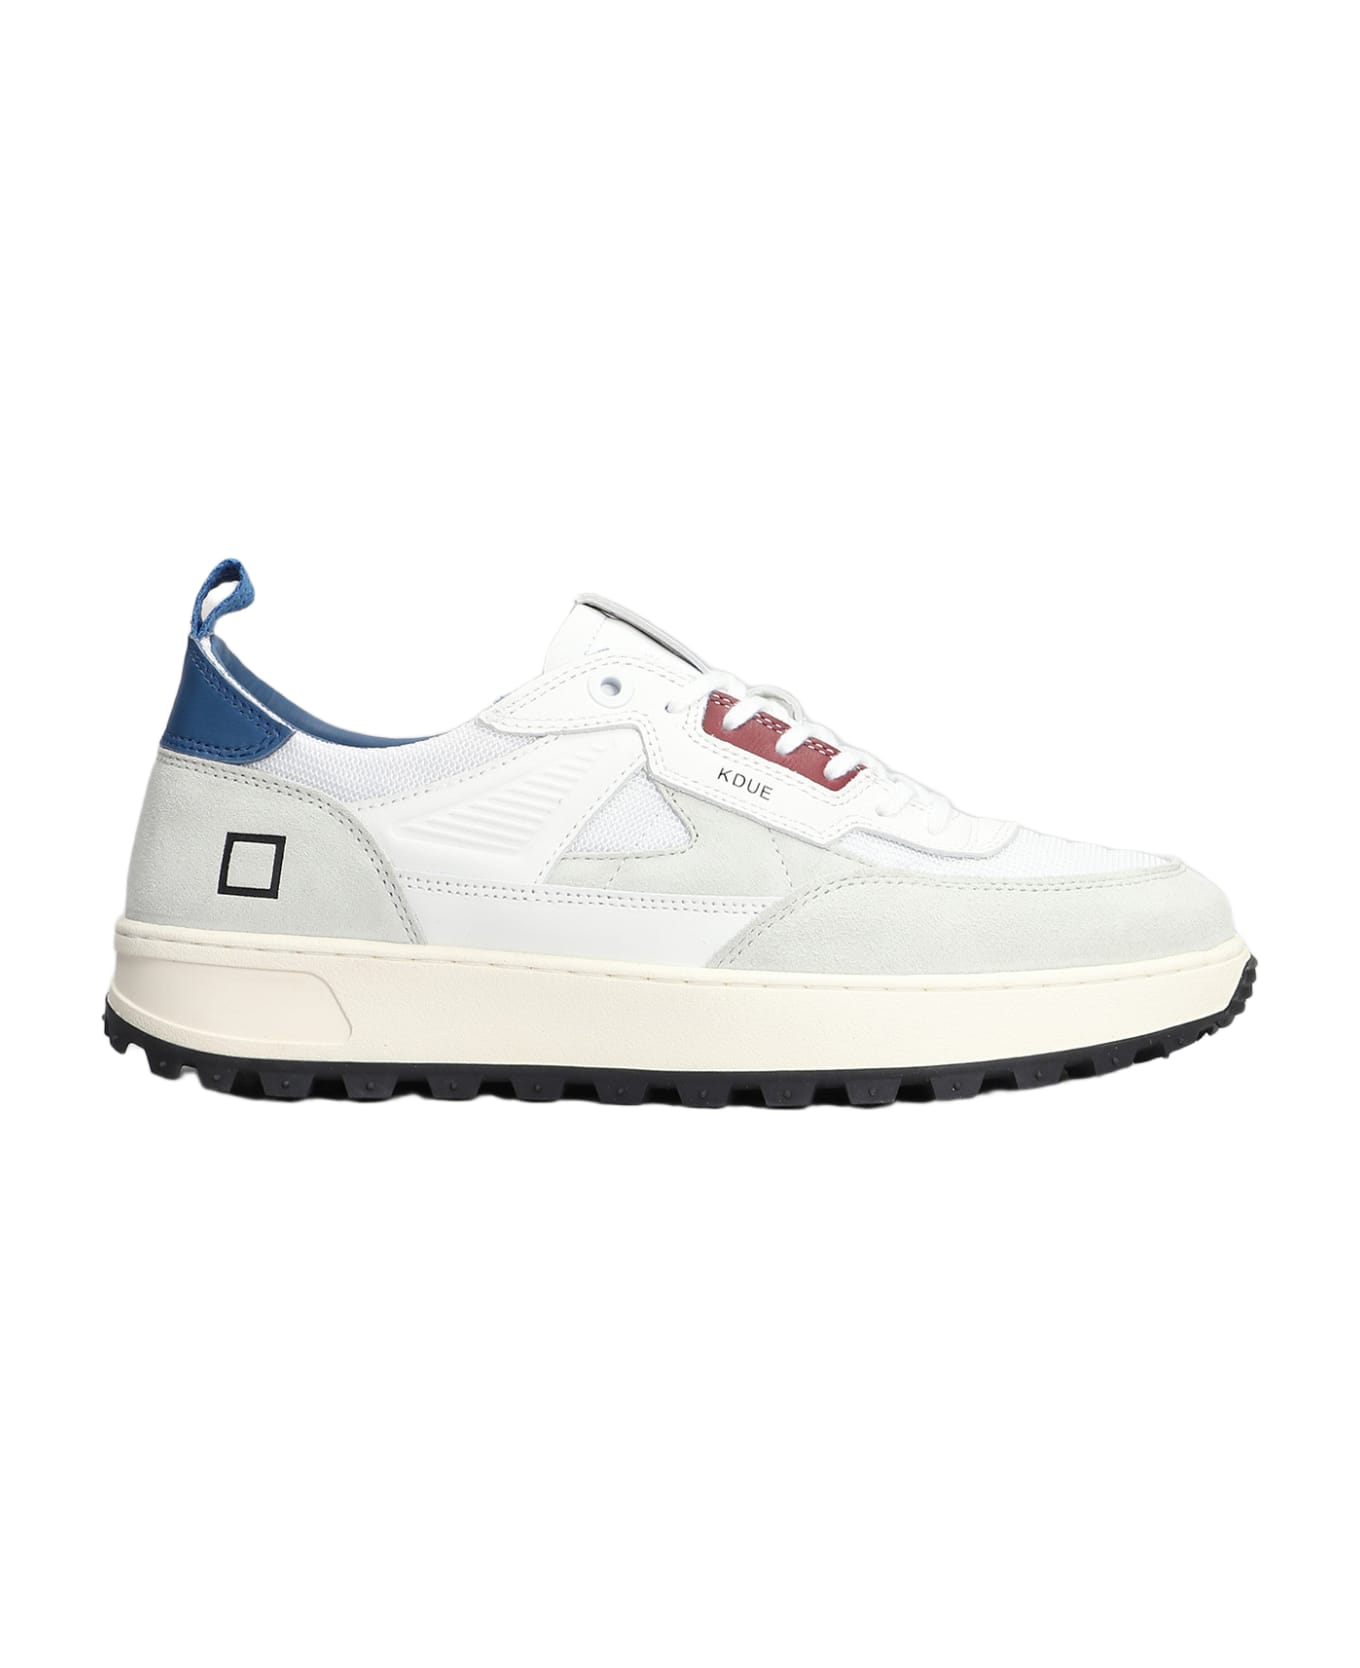 D.A.T.E. Kdue Sneakers In White Leather And Fabric - white